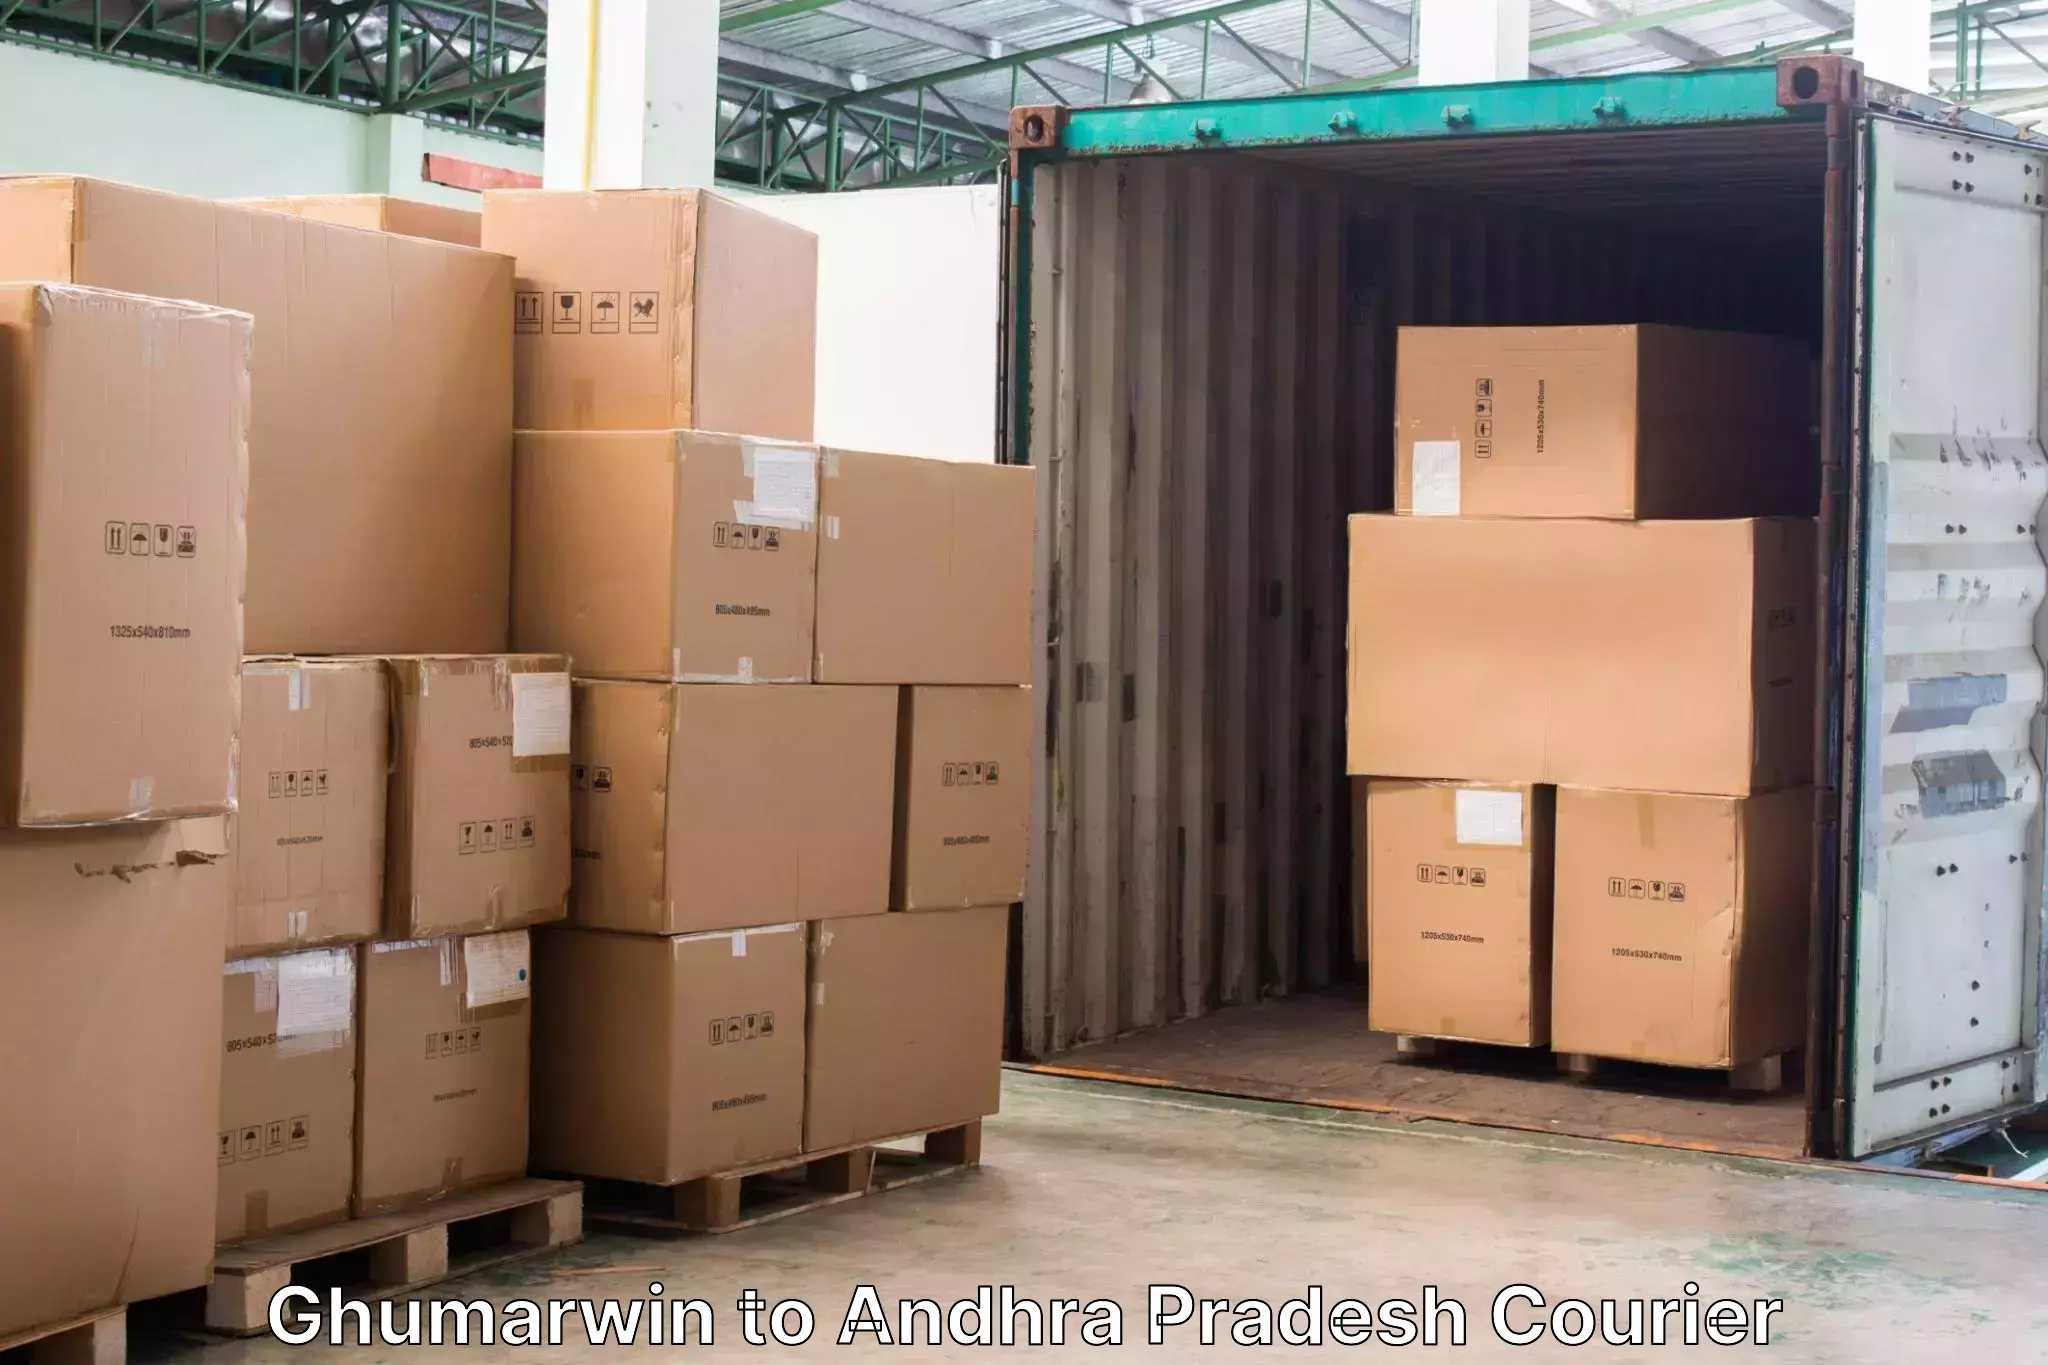 Luggage transport consulting Ghumarwin to Andhra Pradesh